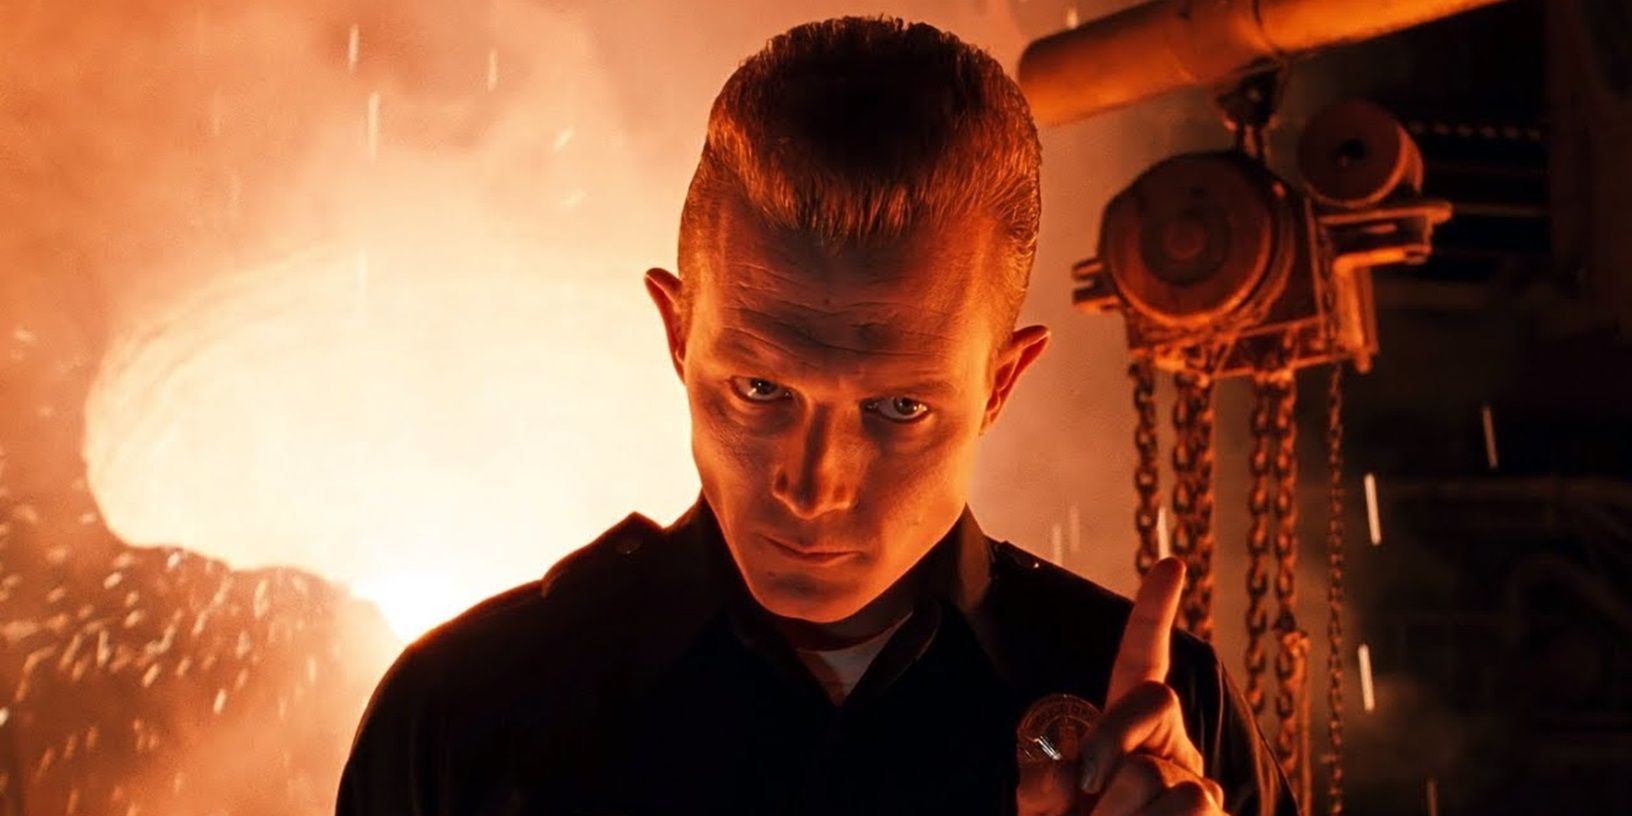 Robert Patrick as T-1000 holding up a finger and looking menacing at the steel mill in Terminator 2: Judgment Day